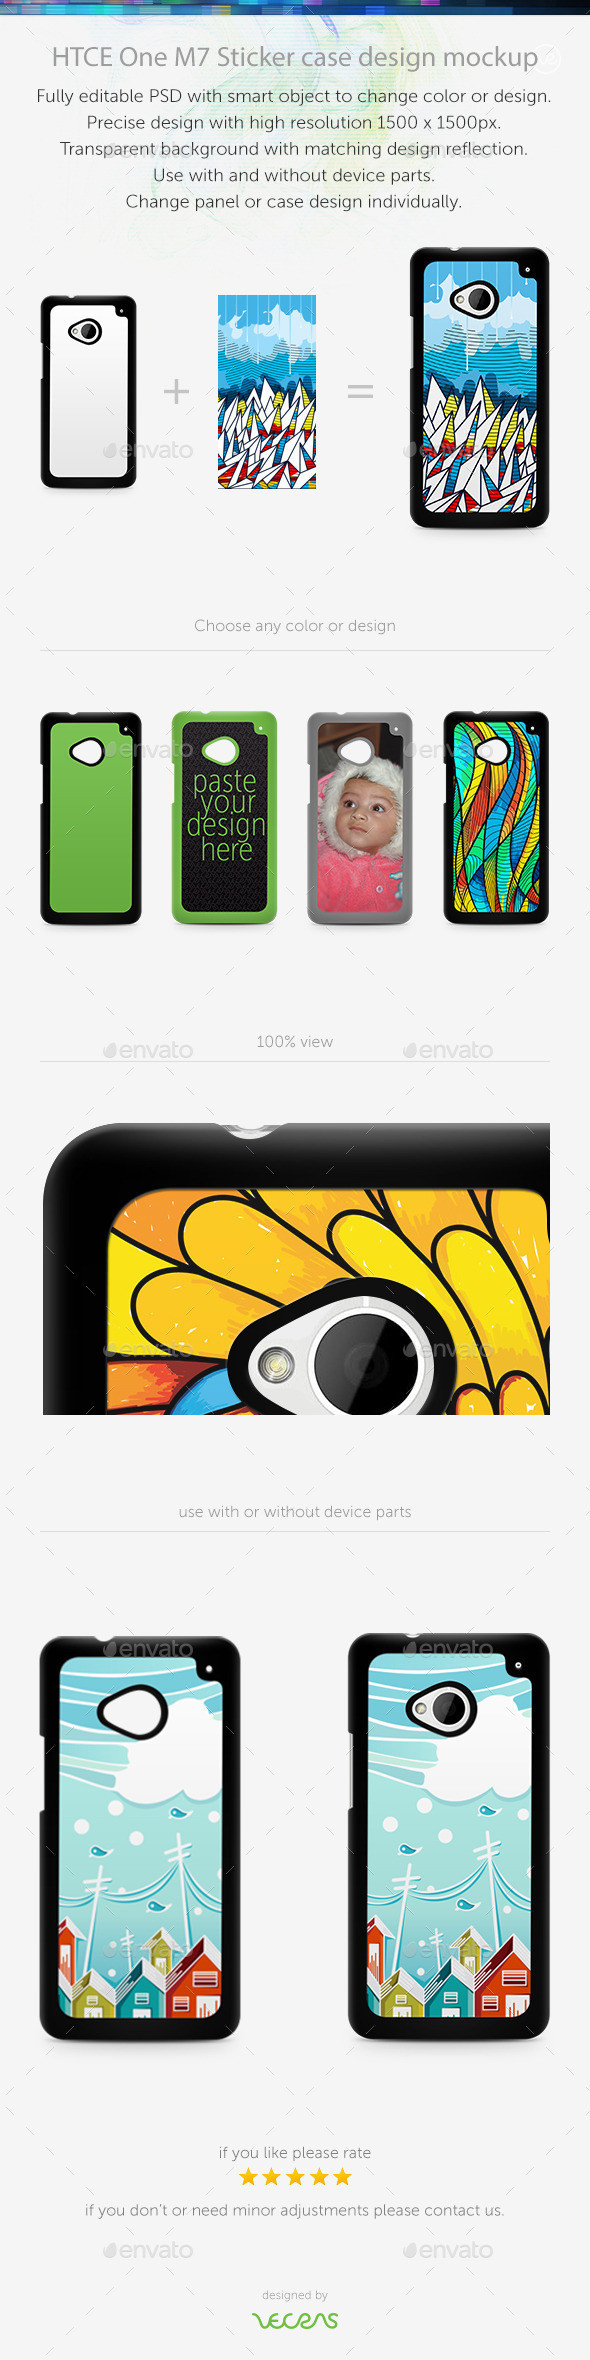 Preview htce one m7 stickercase mockup back